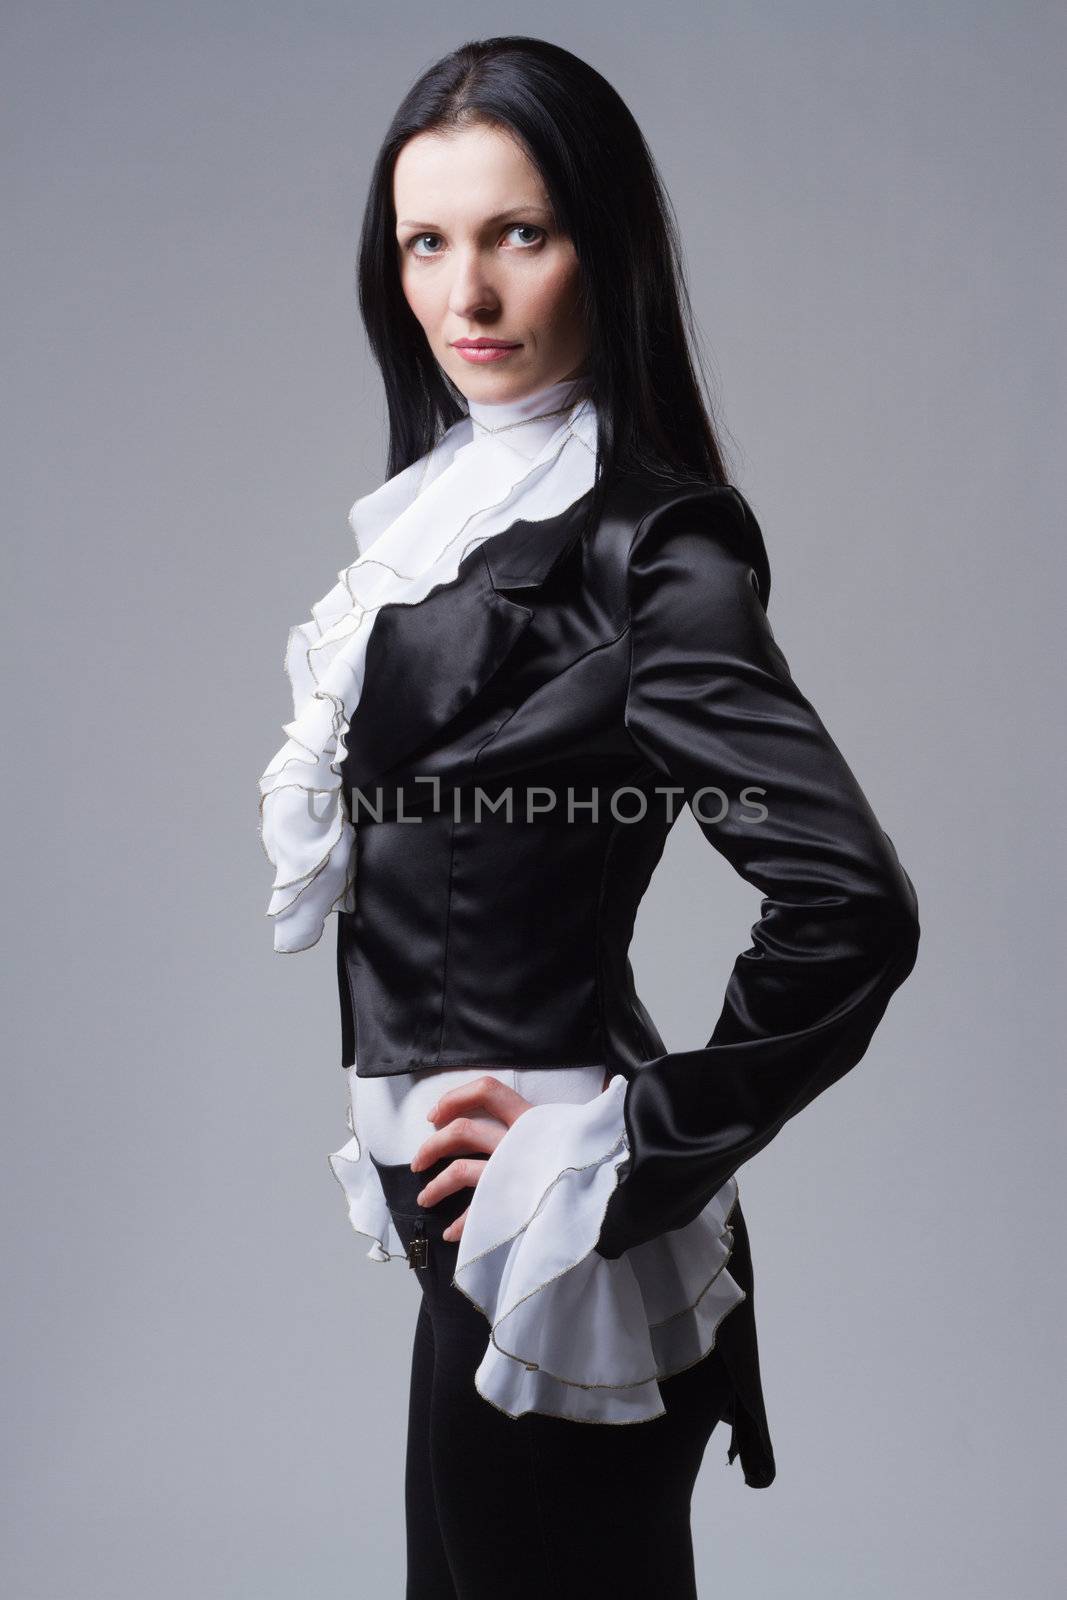 Elegant woman in tailcoat against gray background